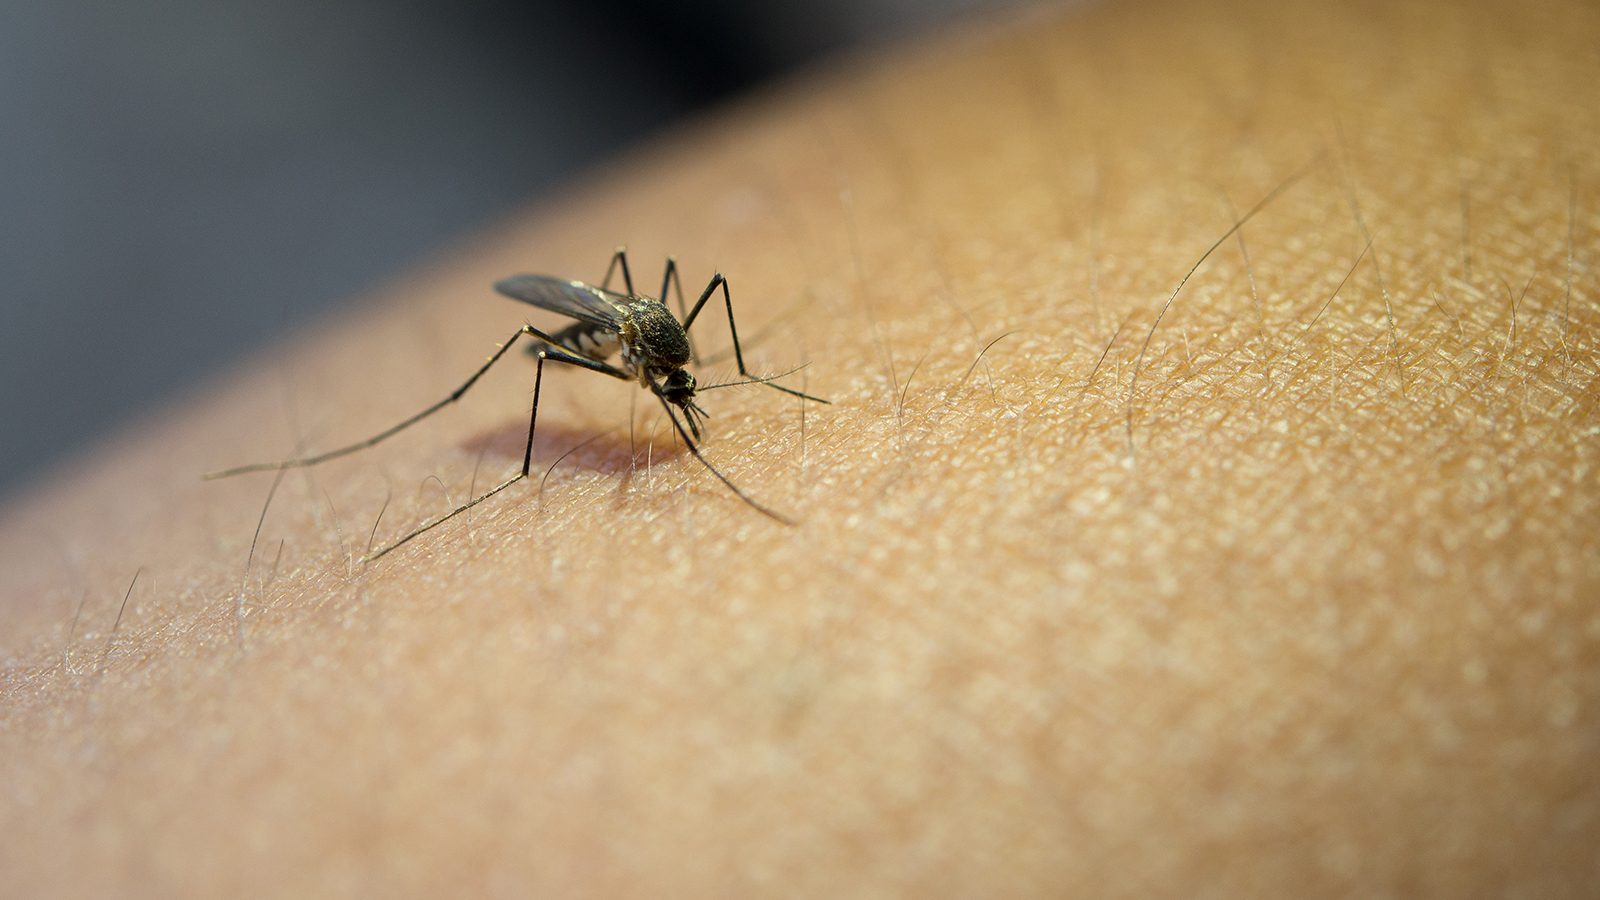 Want to Protect Yourself From Mosquito Menace? Here Are Easy Life Hacks to Follow